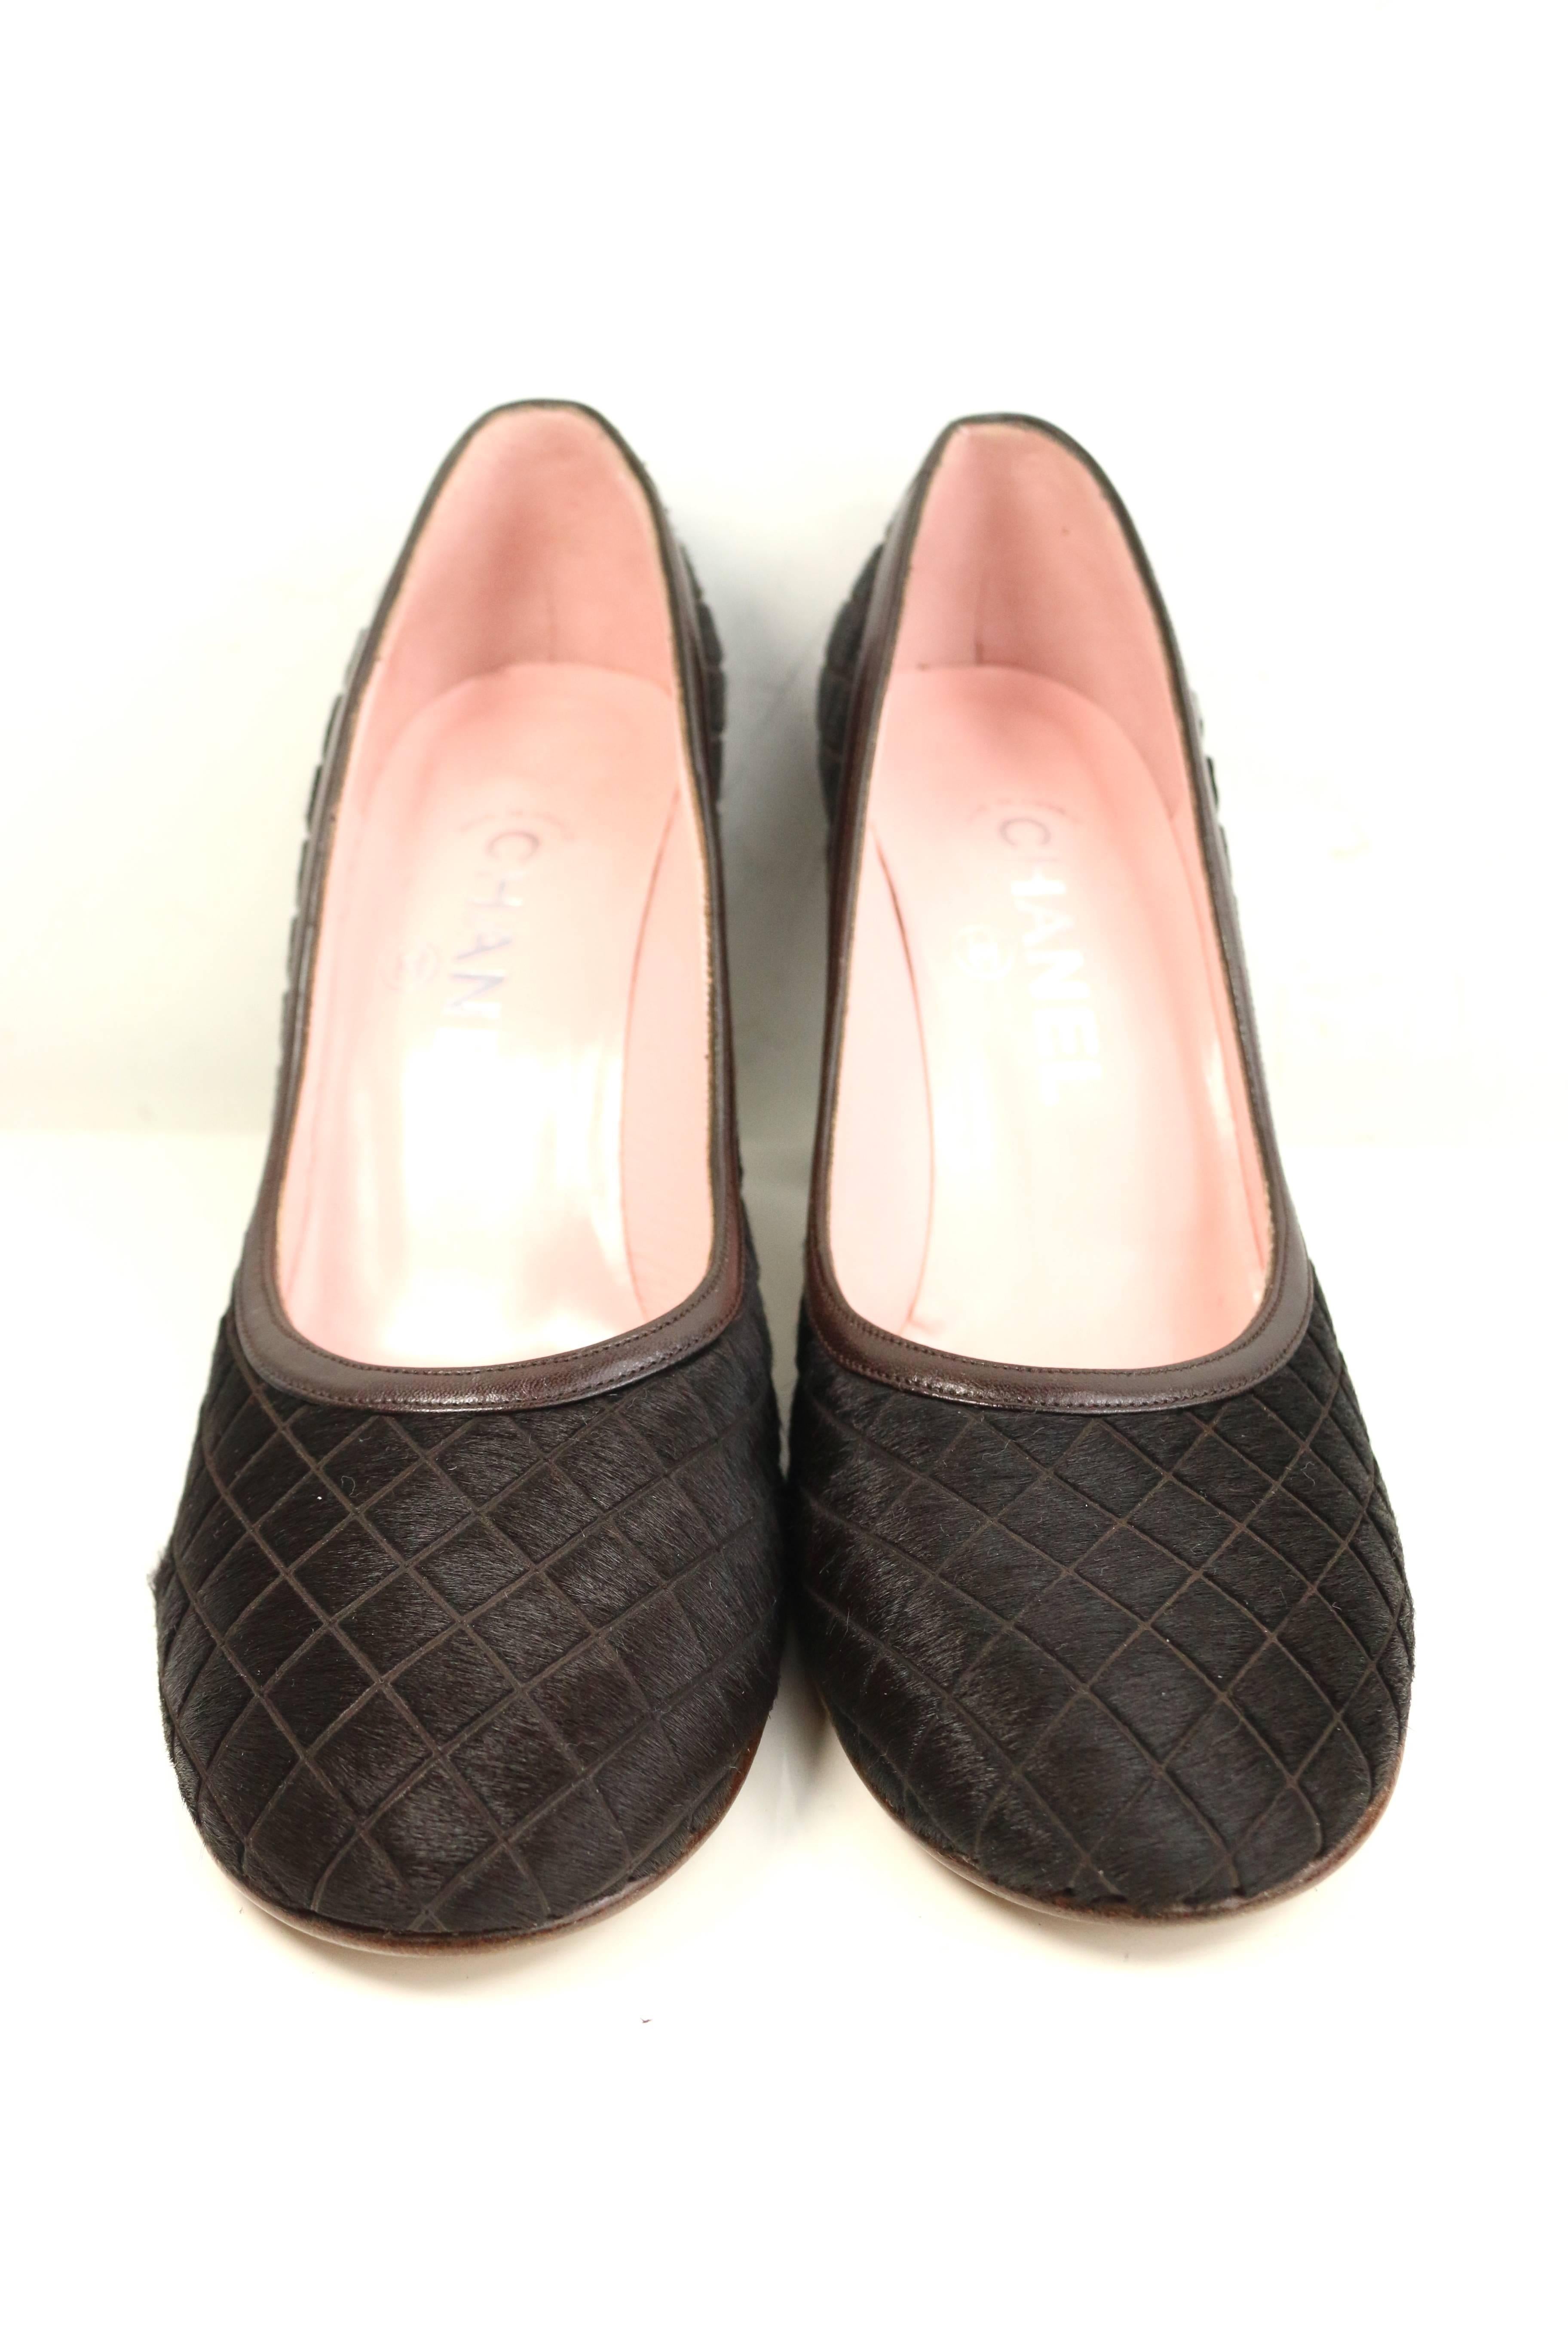 - Chanel brown round toe pumps.

- Featuring quilted horse hair with leather trim. 

- Pink leather interior. 

- Size 38. 

